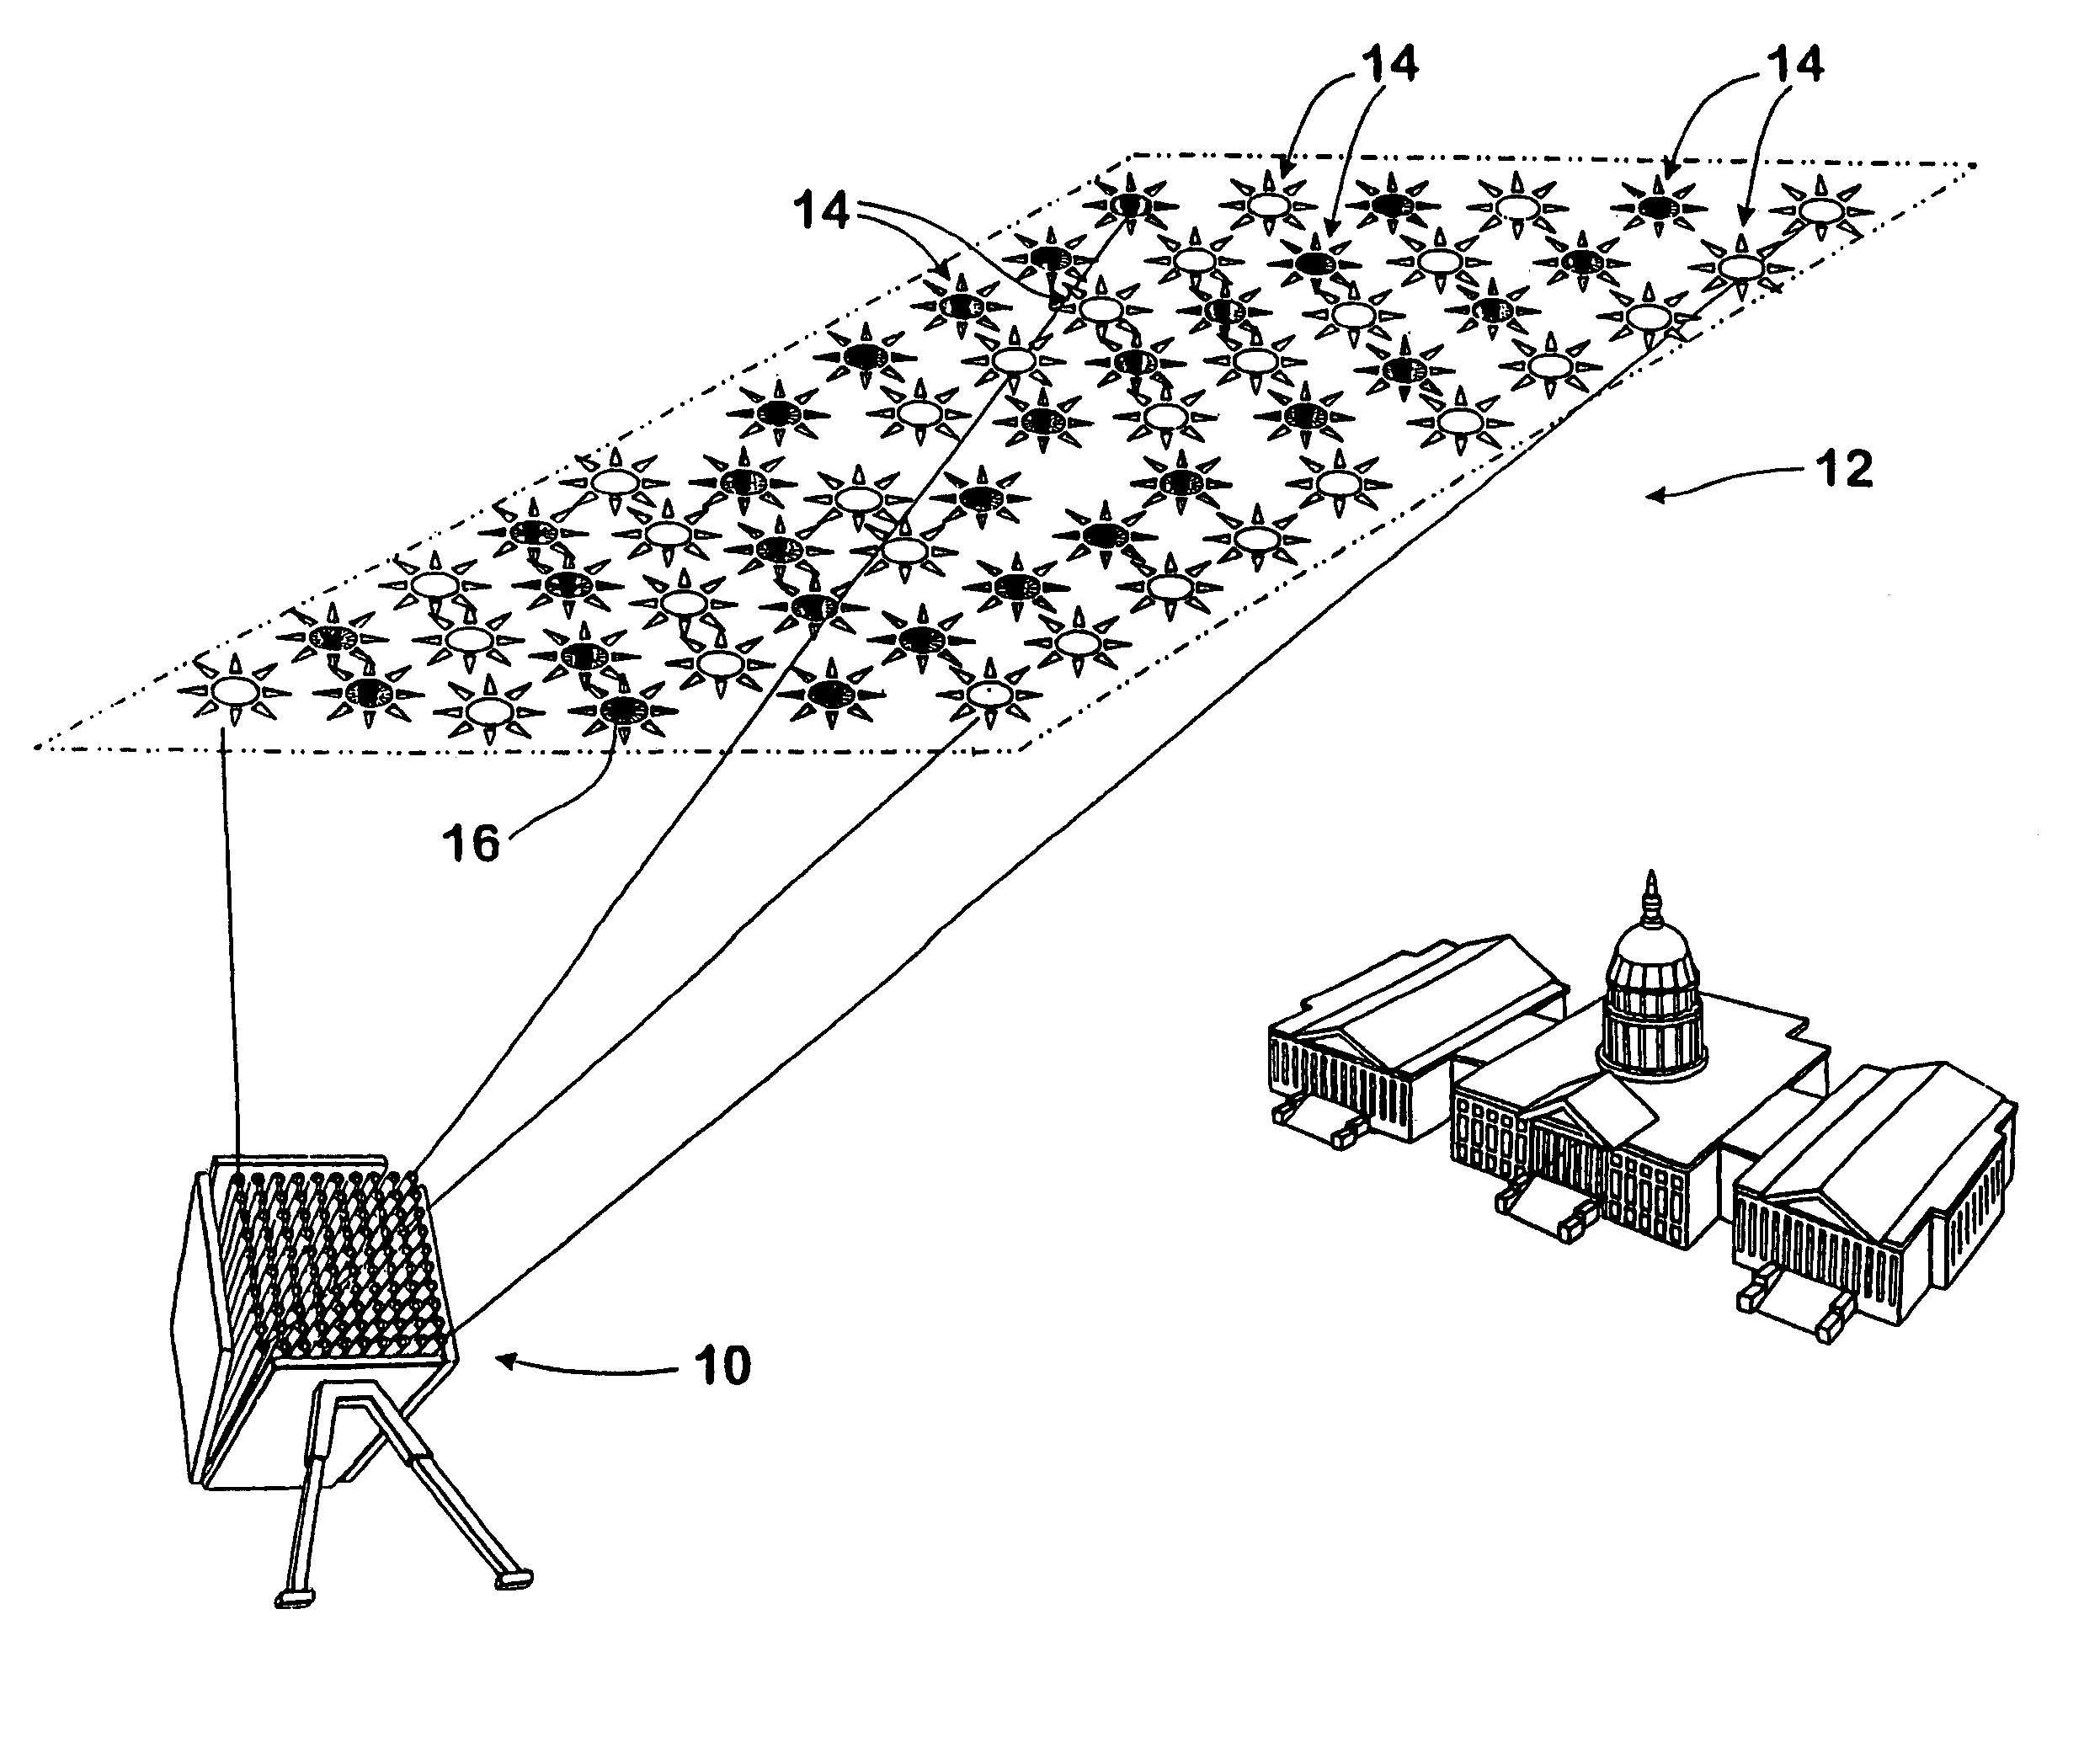 Forming temporary airborne images